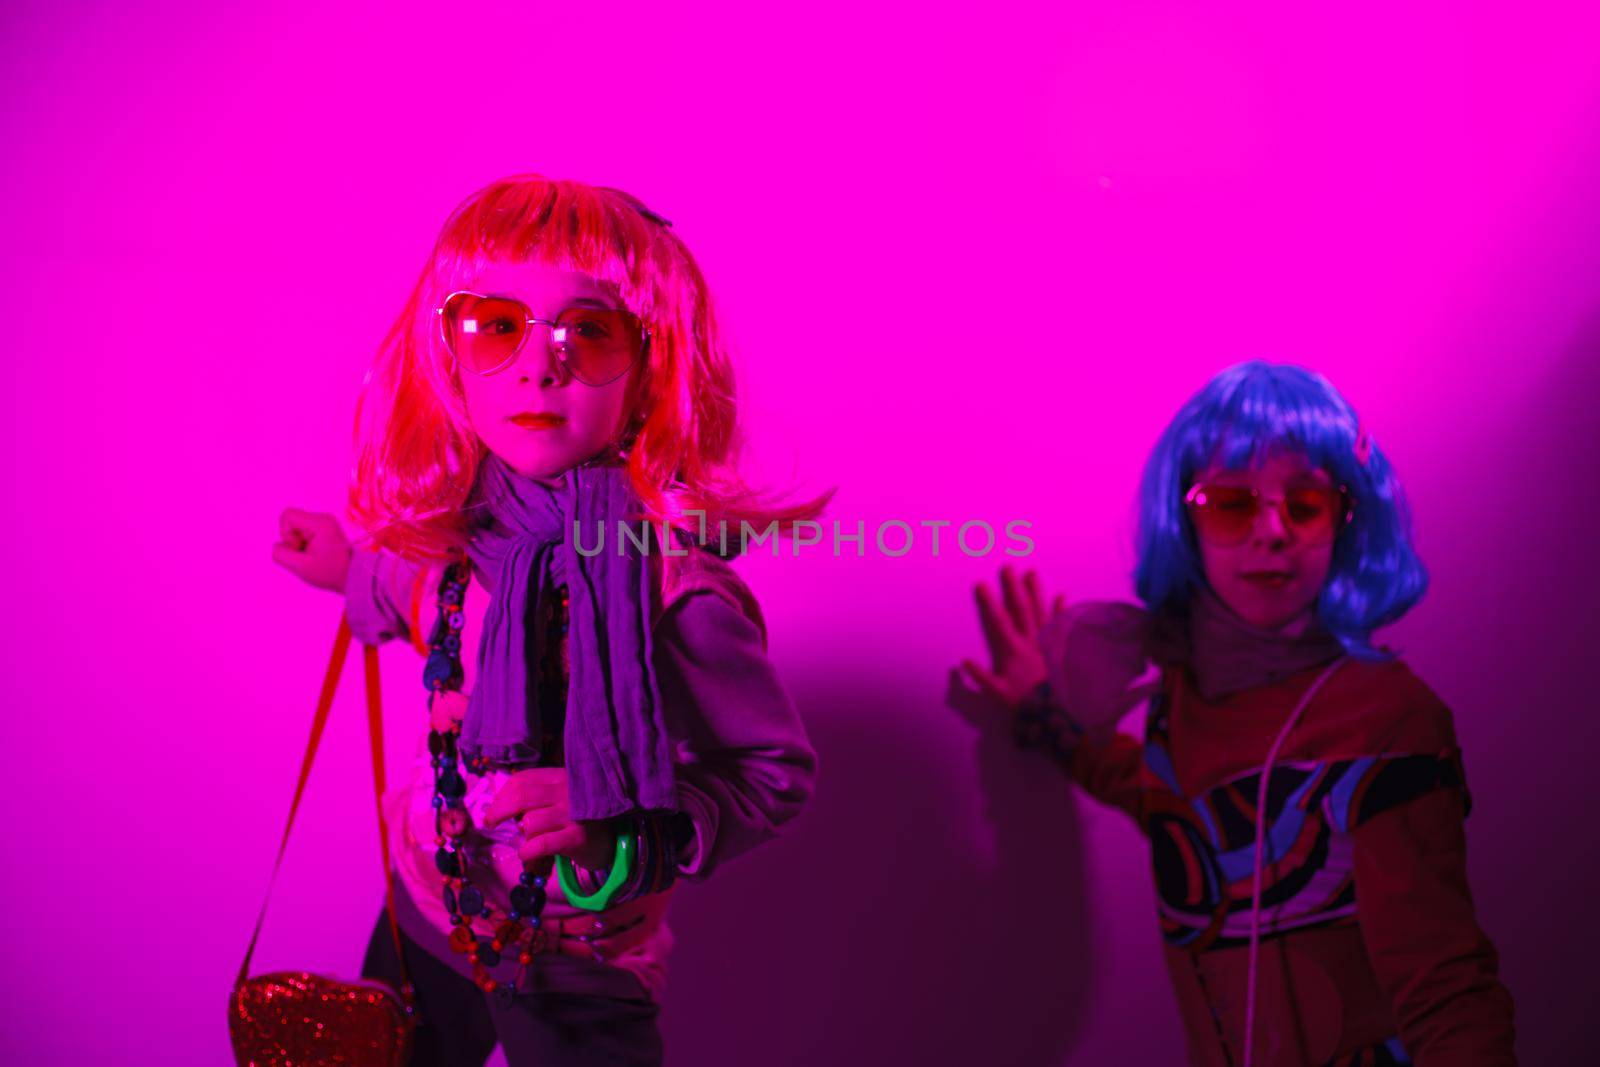 Little girls wearing a colorful wig and heart-shaped sunglasses posed for a photo shooting by bepsimage